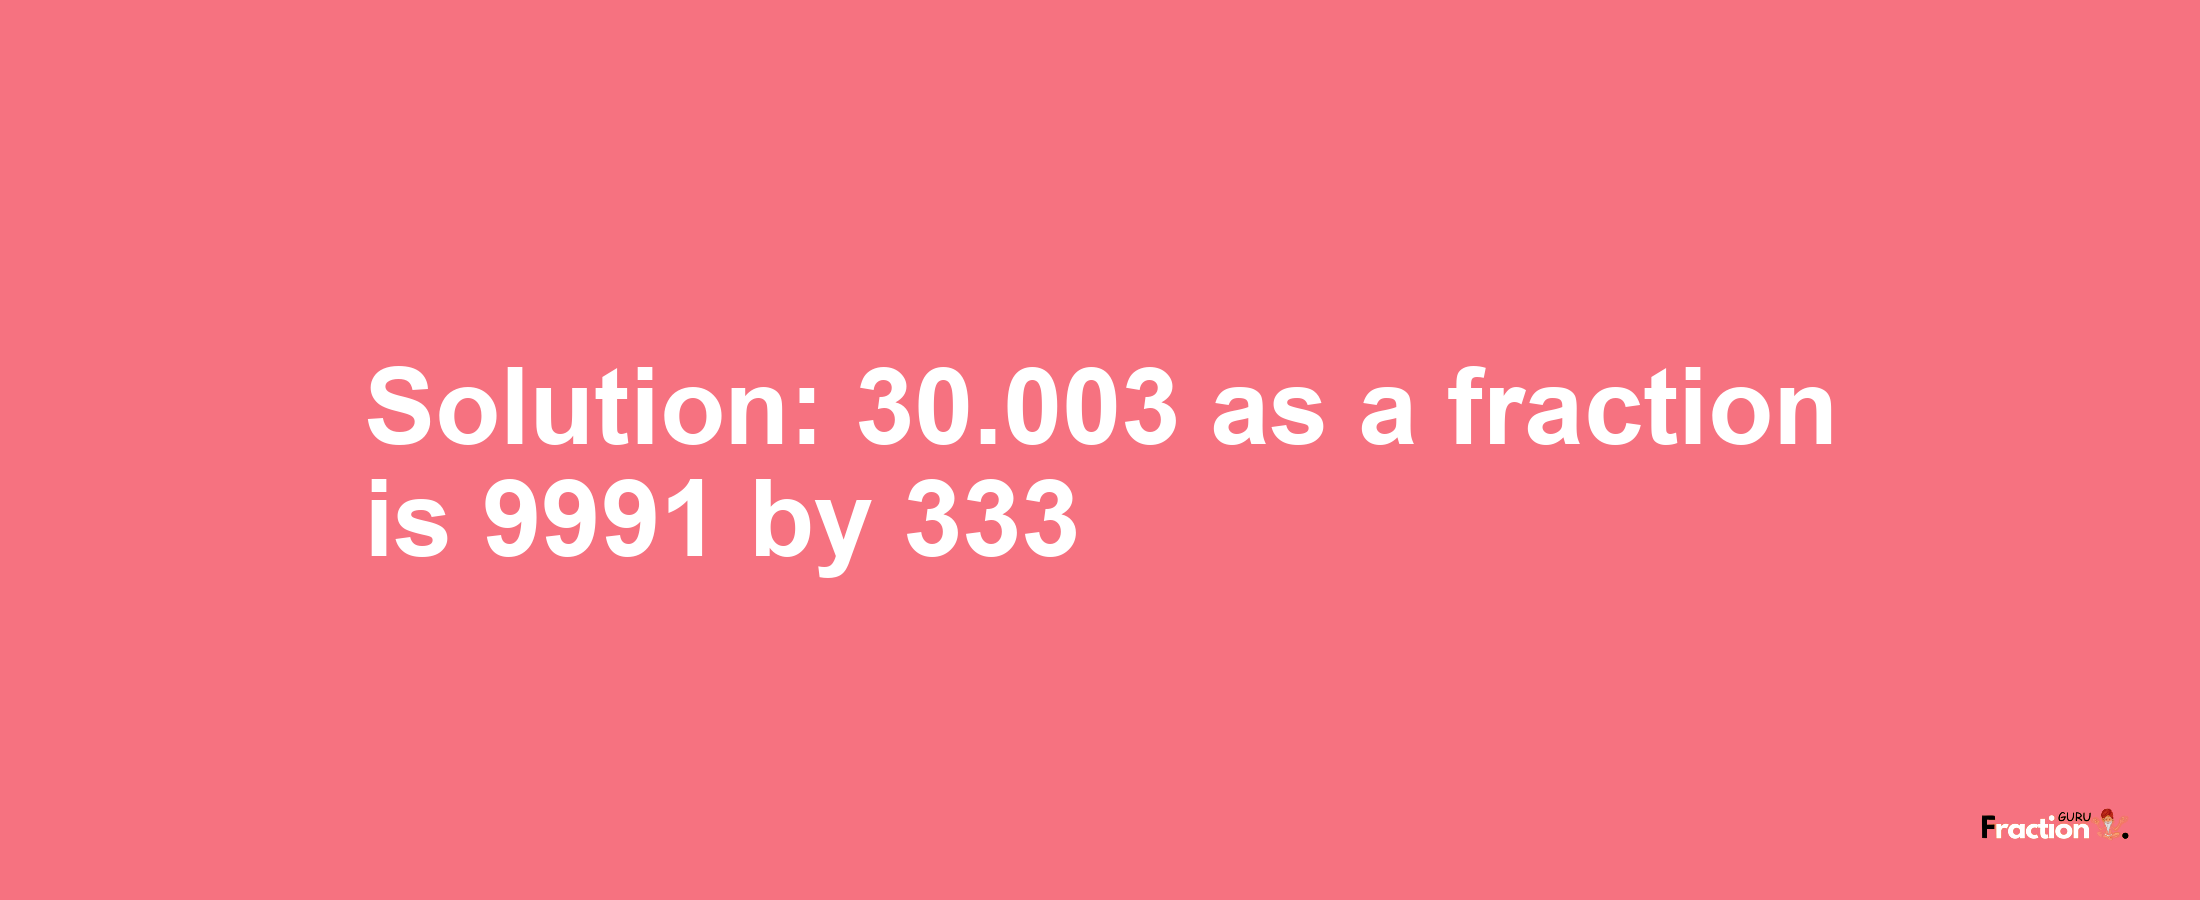 Solution:30.003 as a fraction is 9991/333